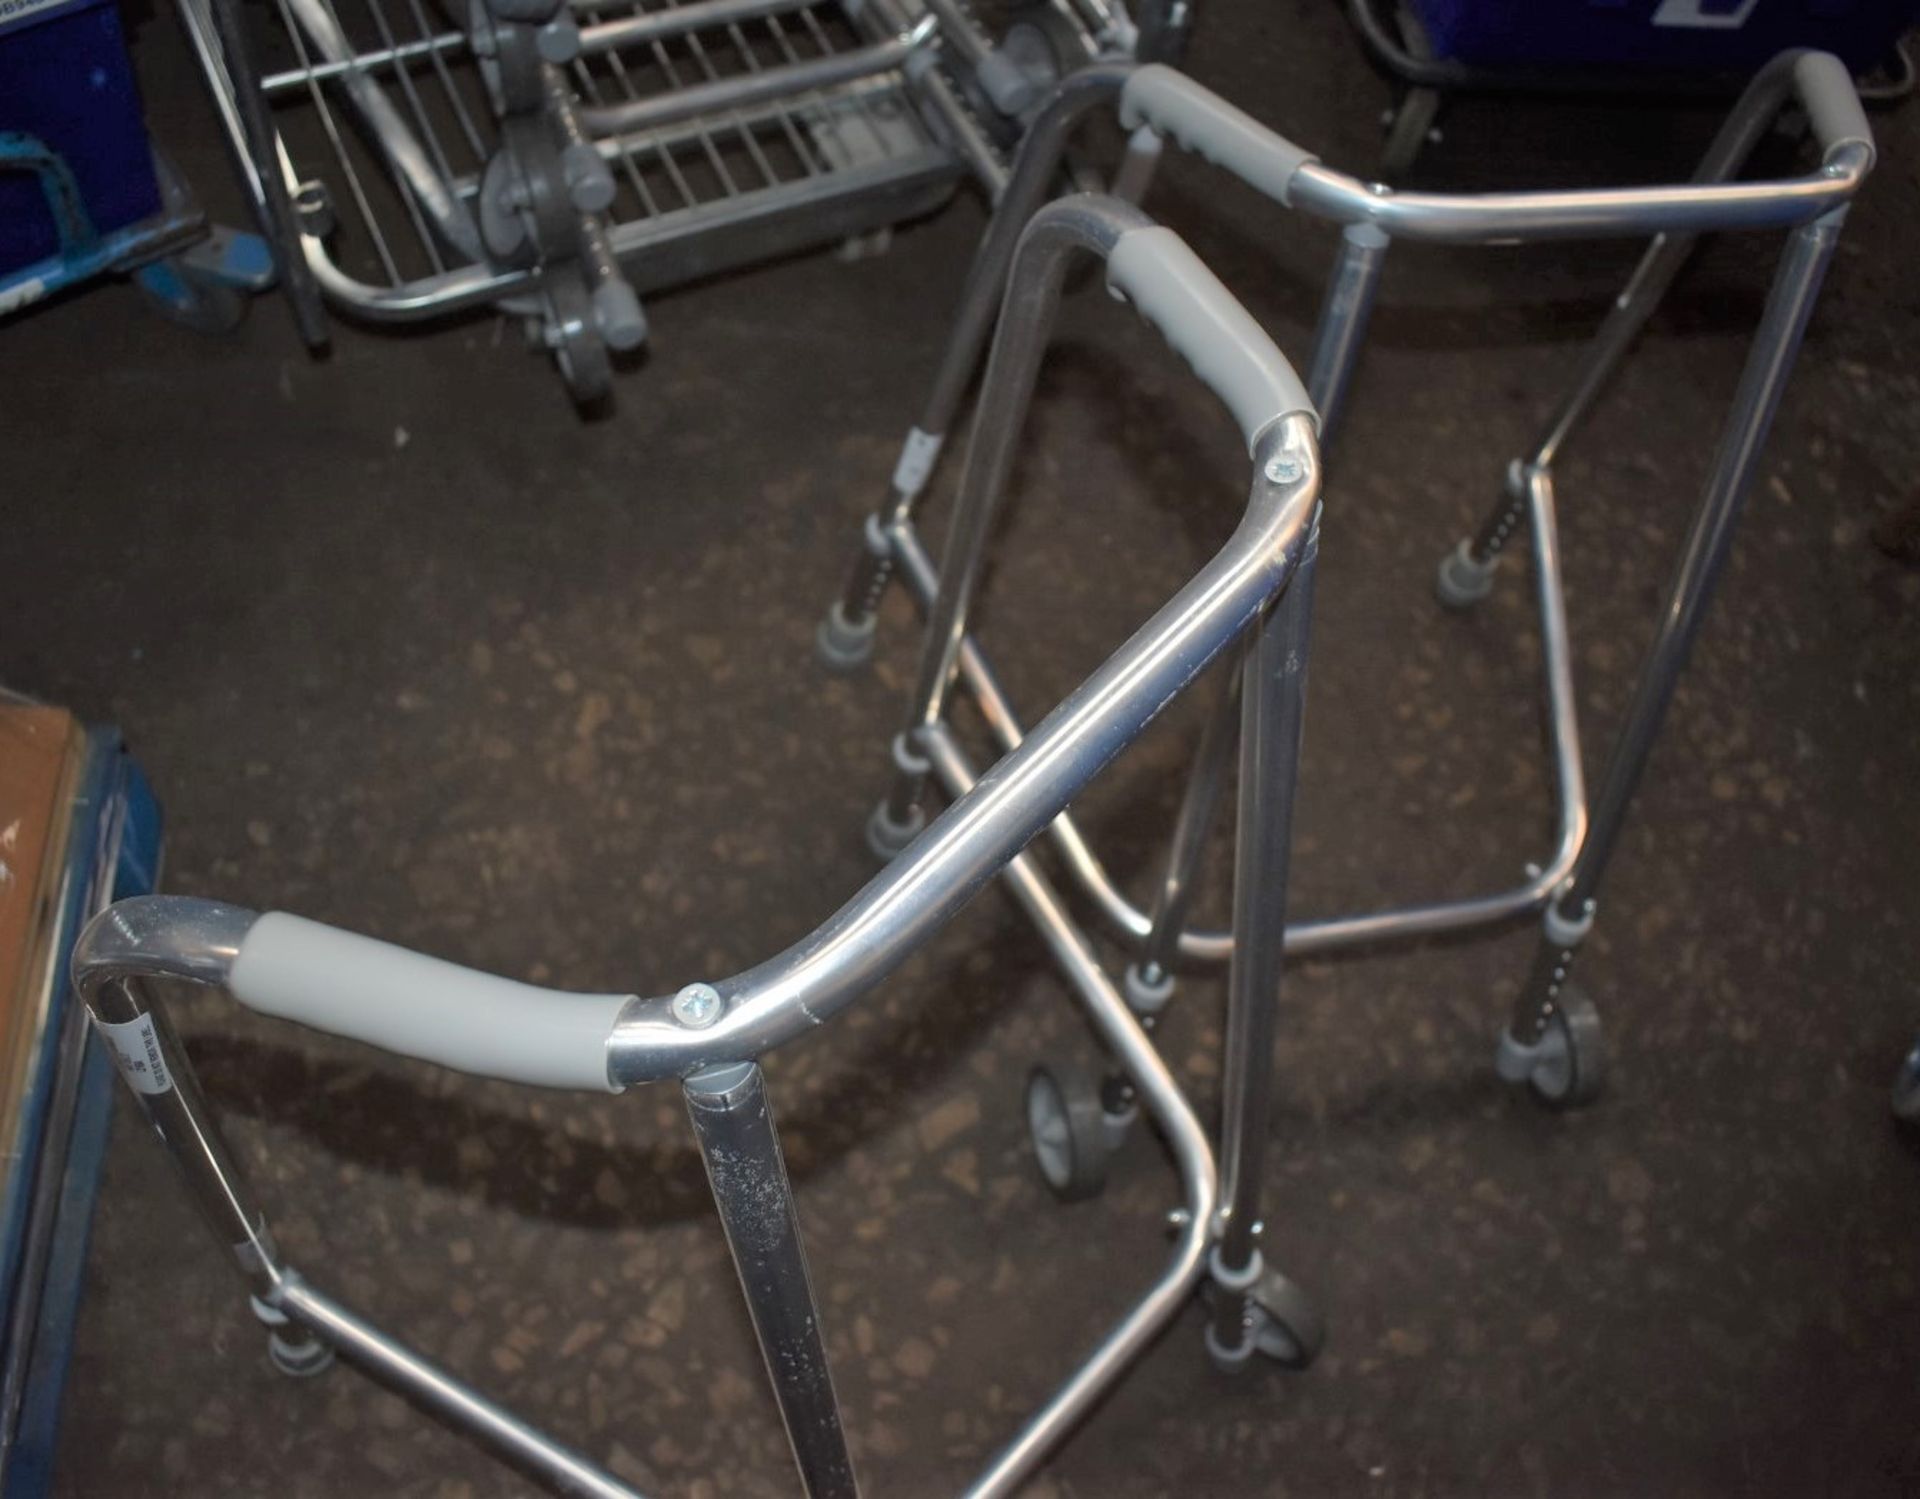 10 x Trulife Walking Aid Frames - Lightweight - Model RM563373 - Provided in Good Condition - Height - Image 4 of 4